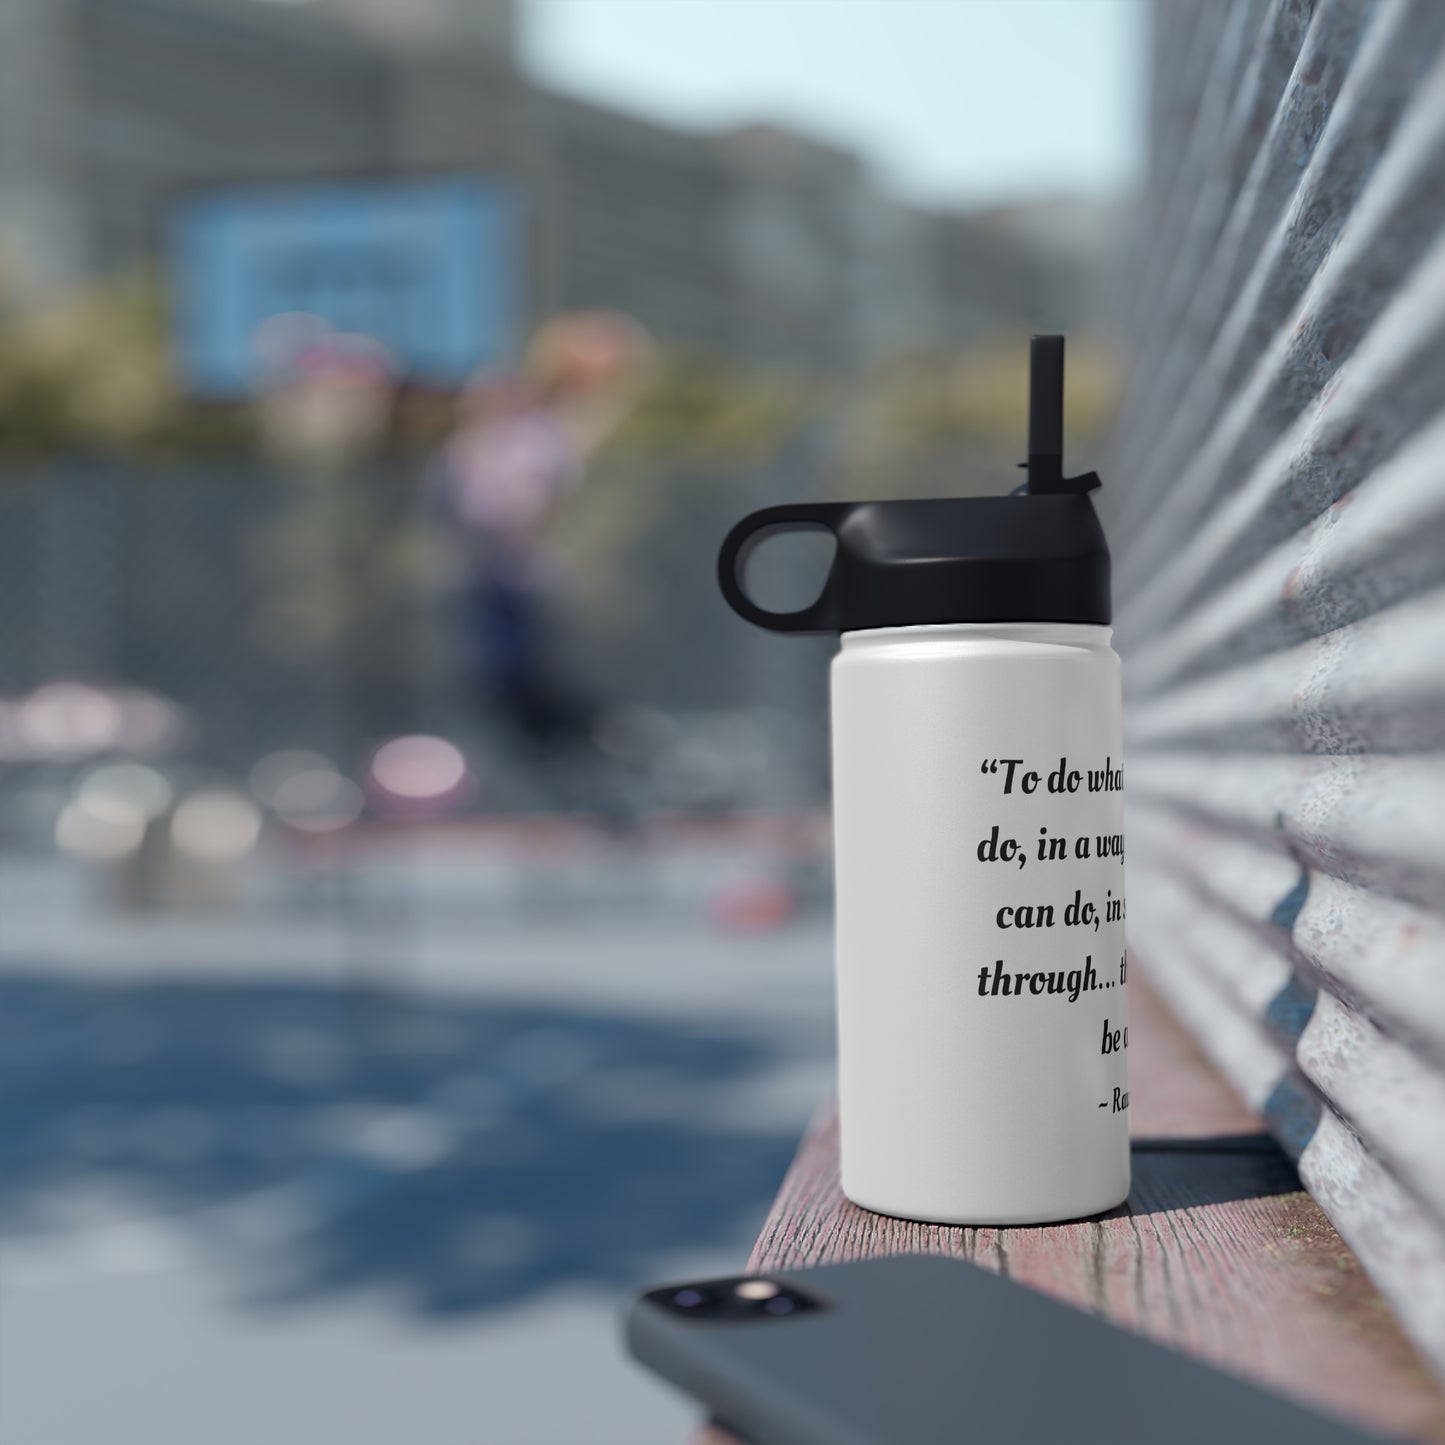 Nurse Inspiration - To do what nobody else will do - Stainless Steel Water Bottle, Standard Lid